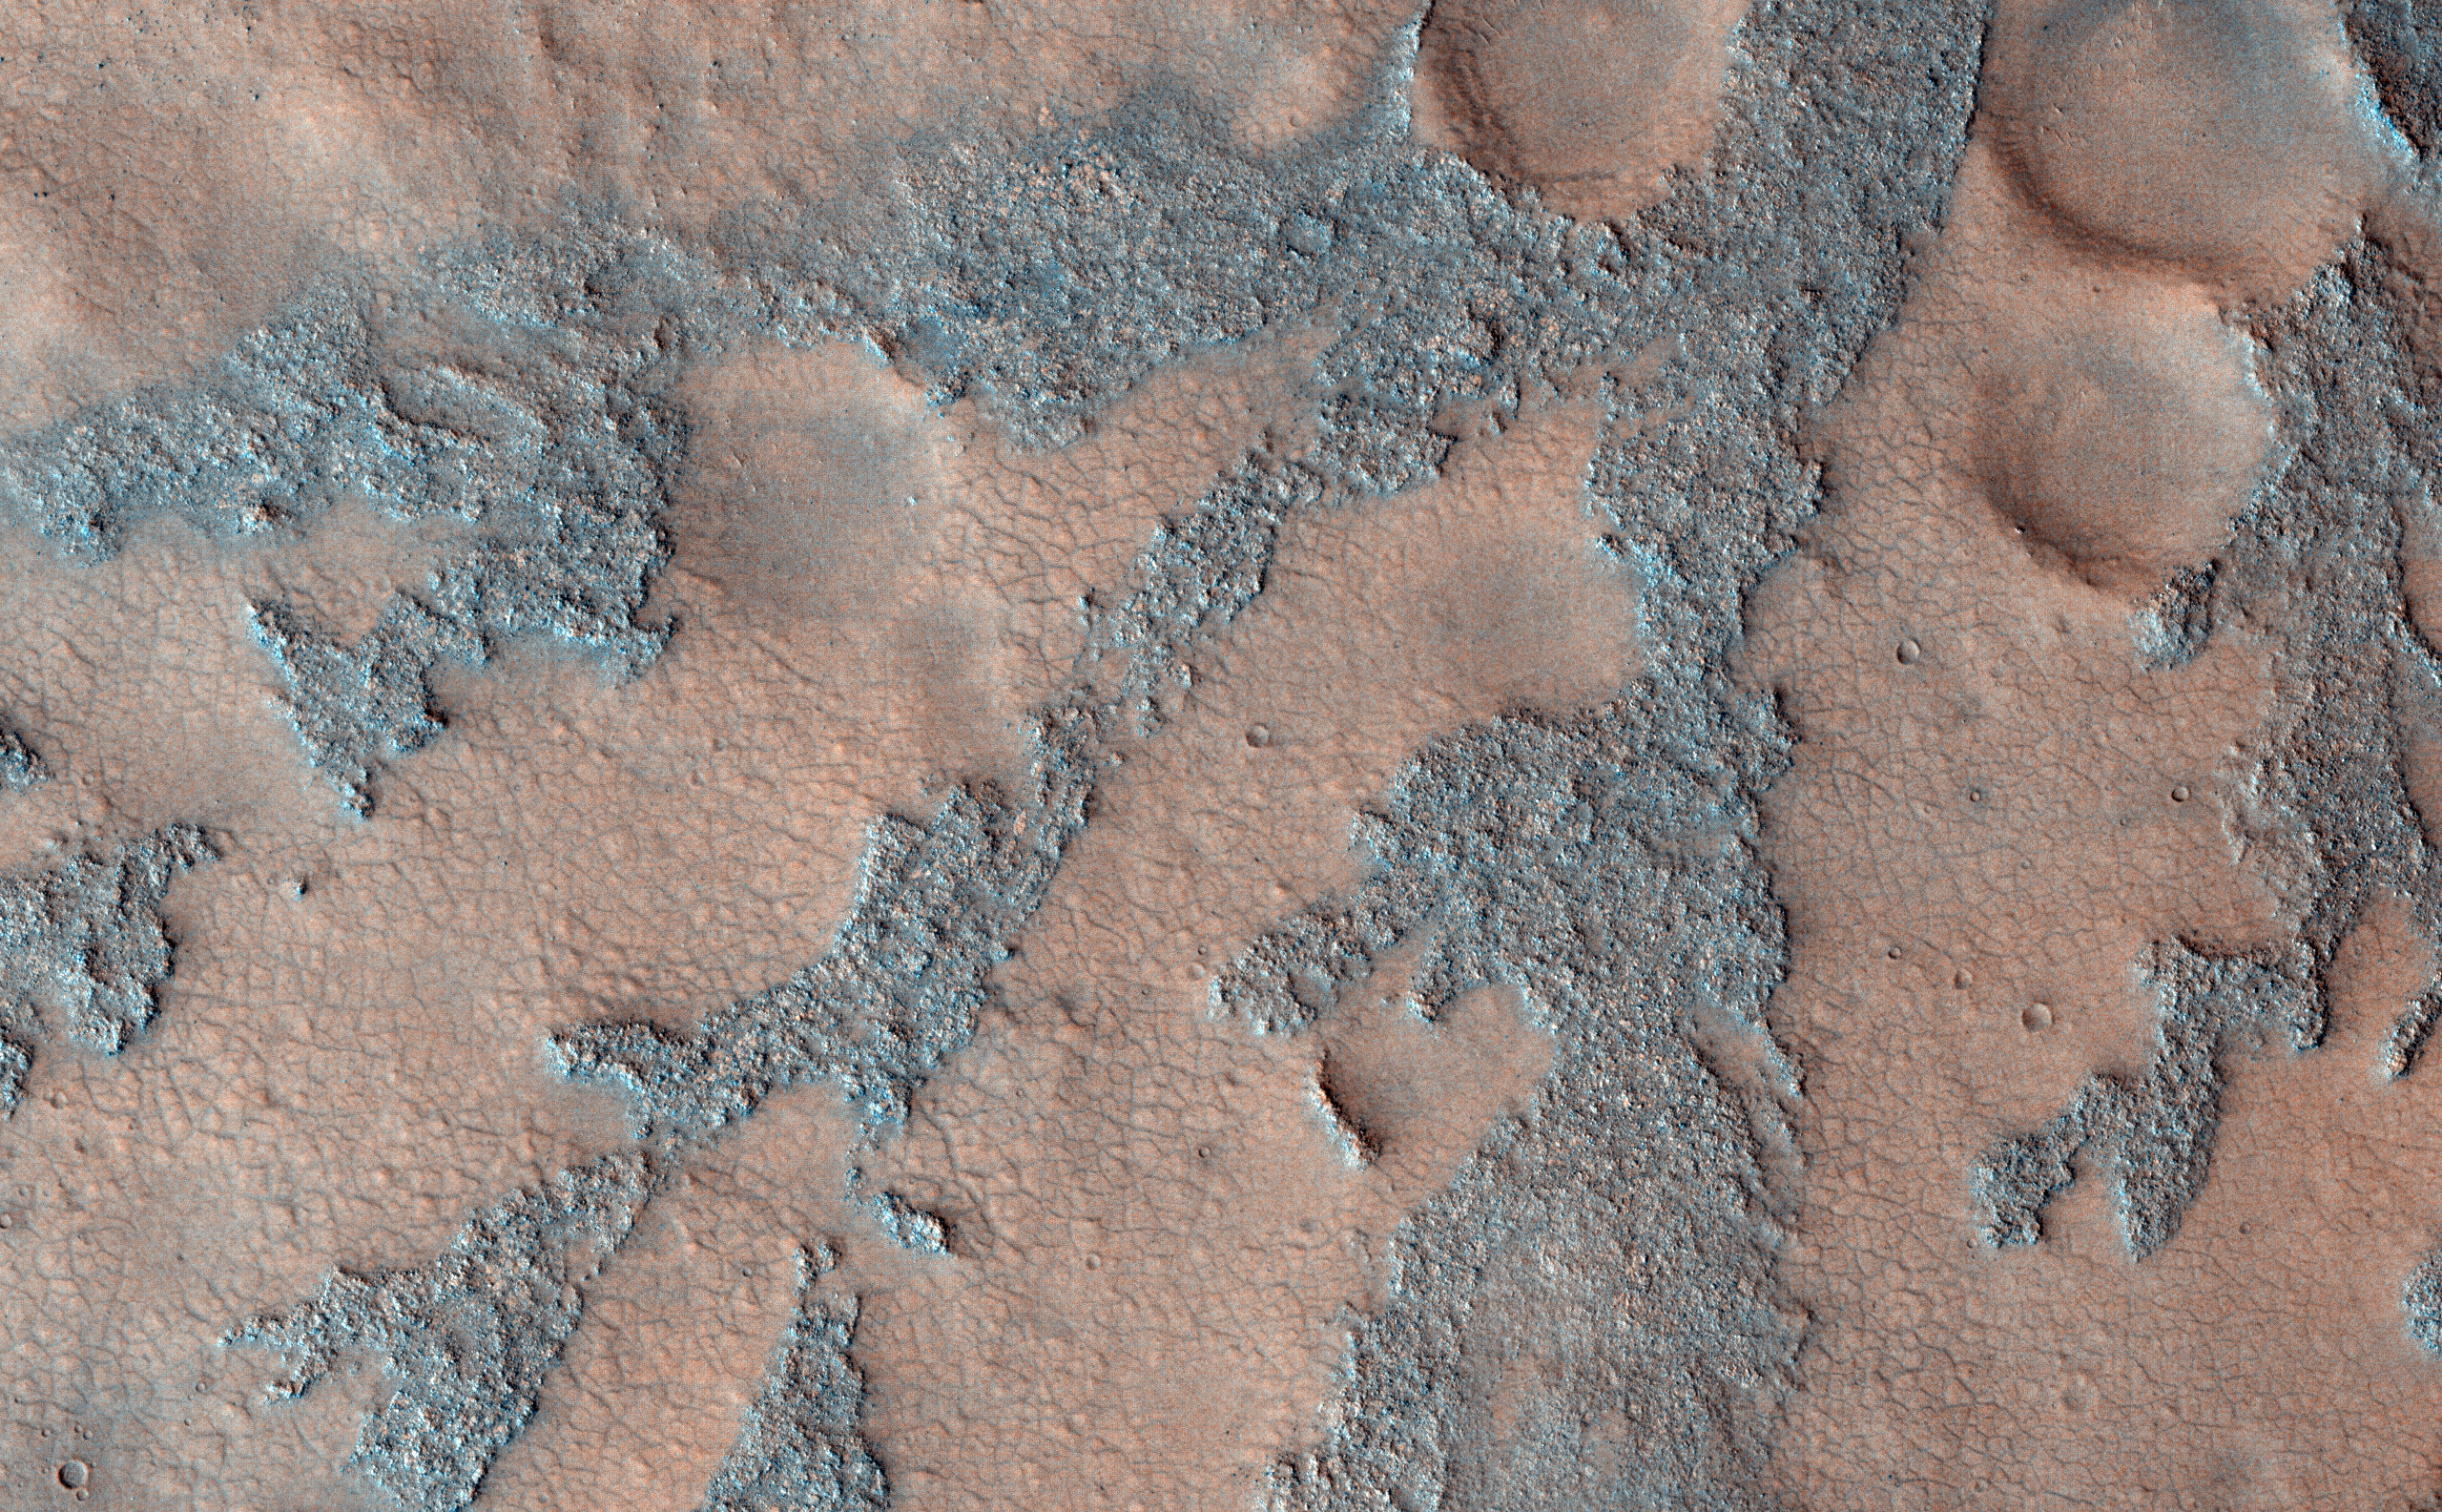 Branched Features on the Floor of Antoniadi Crater